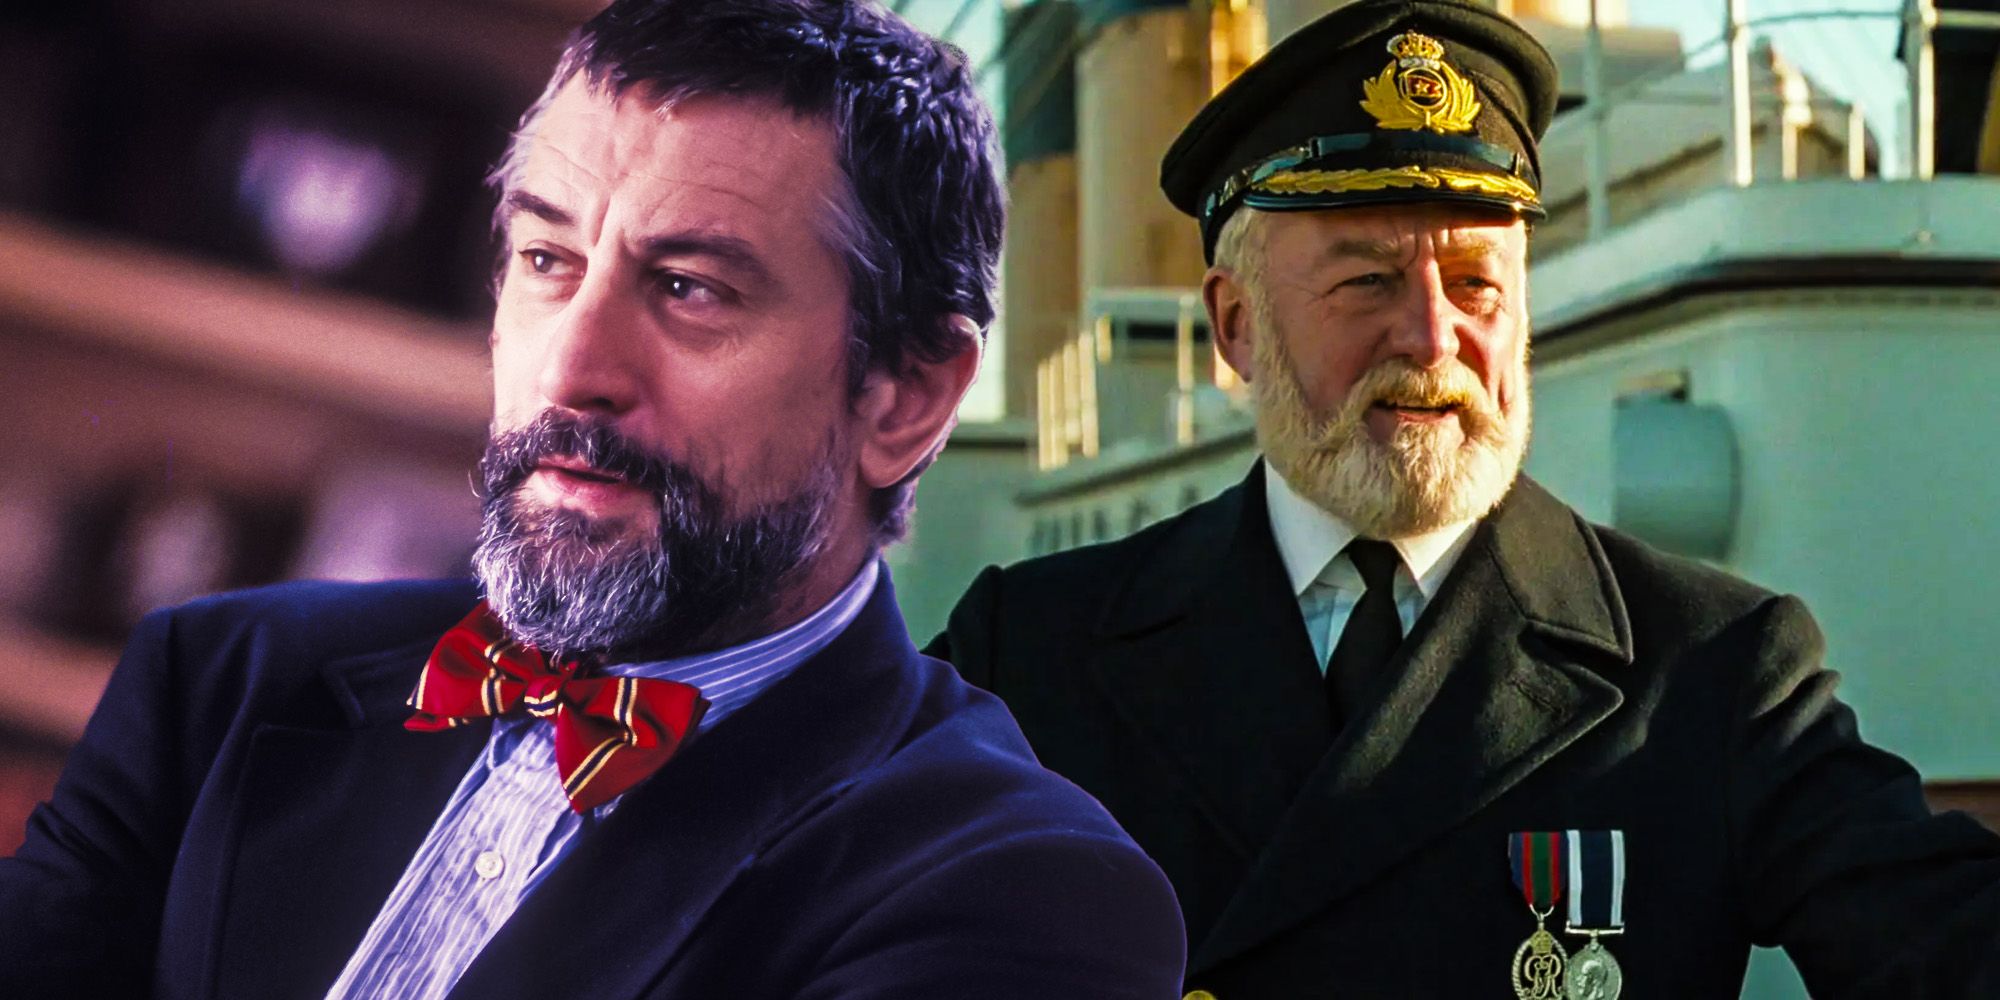 Titanic: The Character Robert De Niro Almost Played (& Why He Didn't)